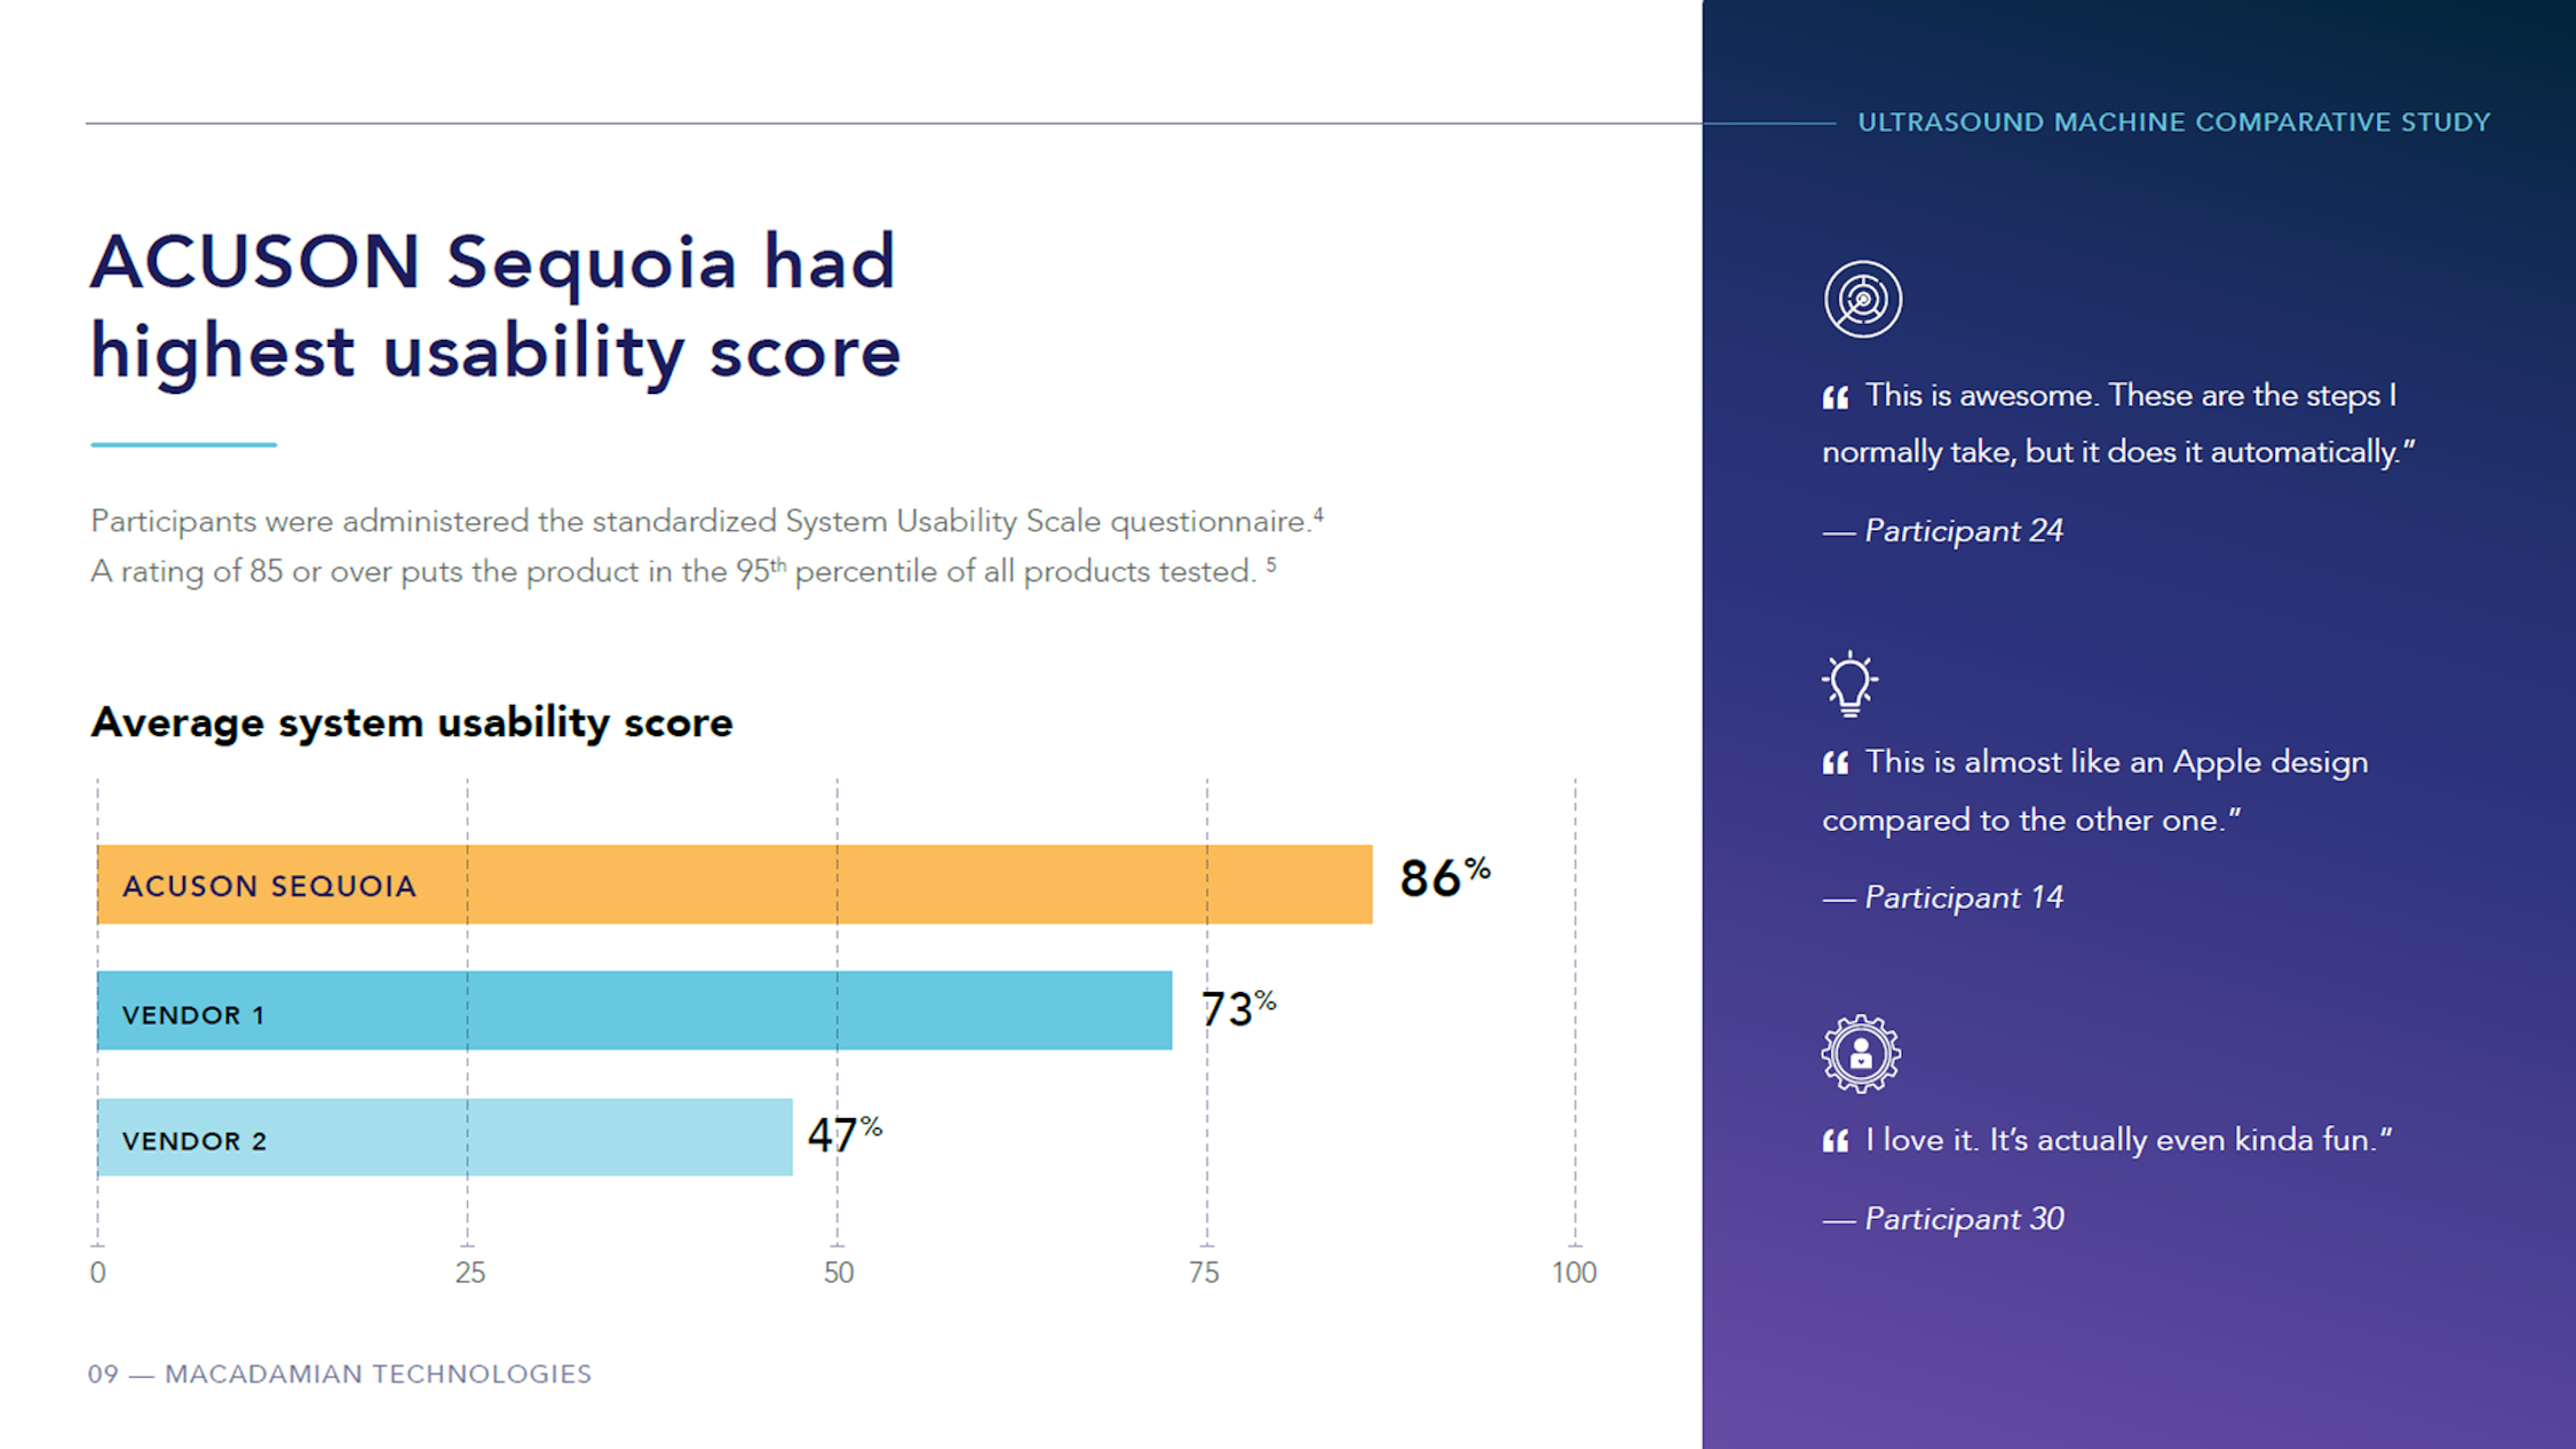 Sonographers strongly preferred the Acuson Sequoia over the other devices - 82% of the participants preferred the Sequoia